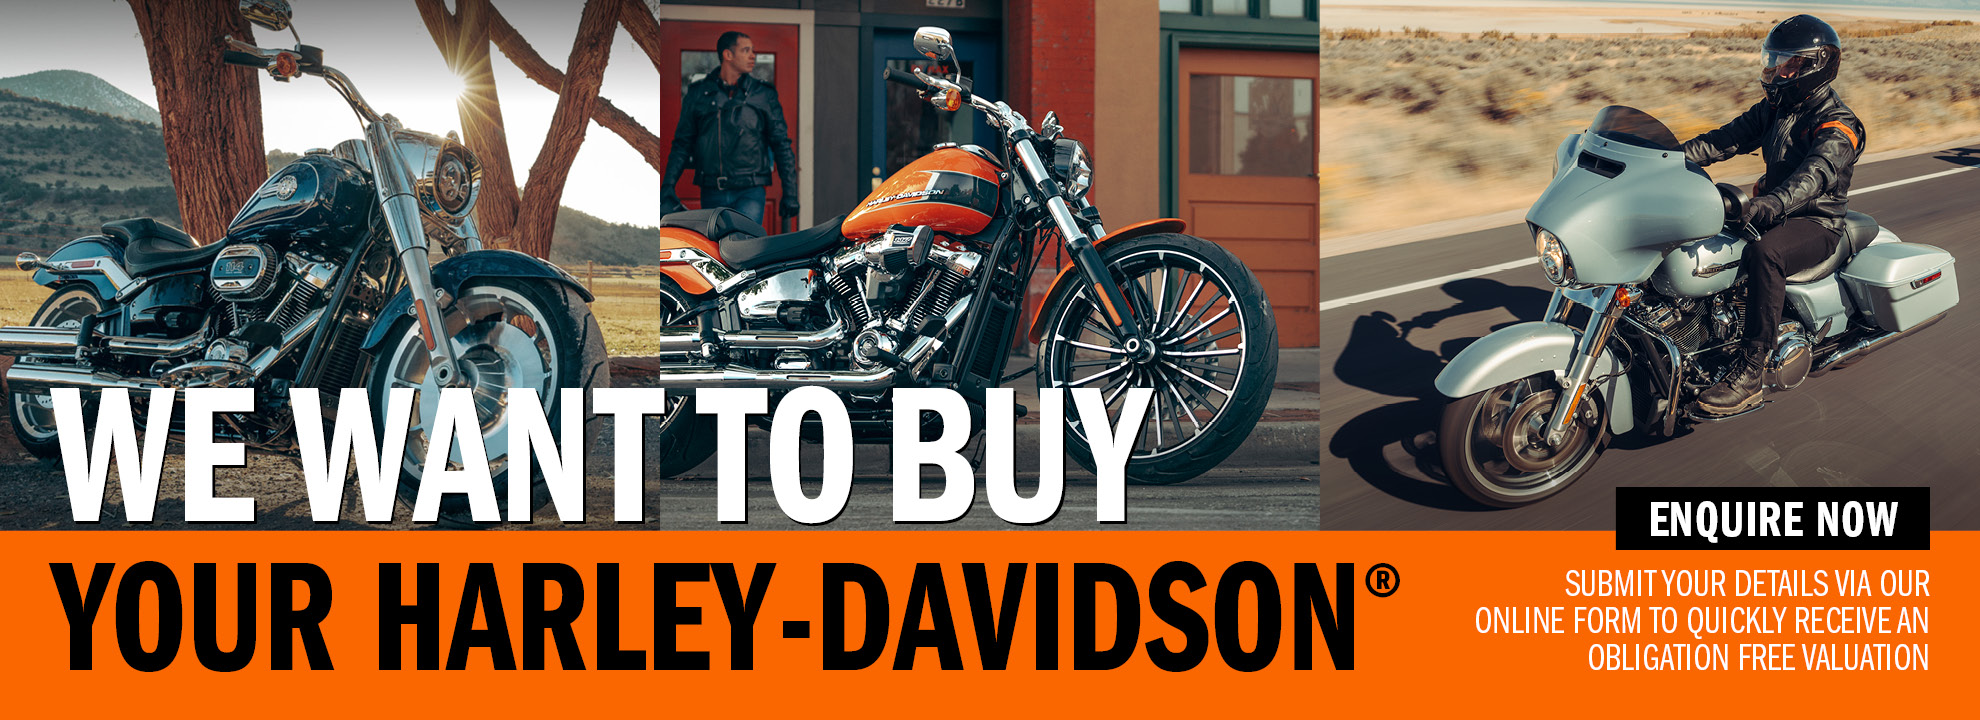 We Want to Buy Your Harley